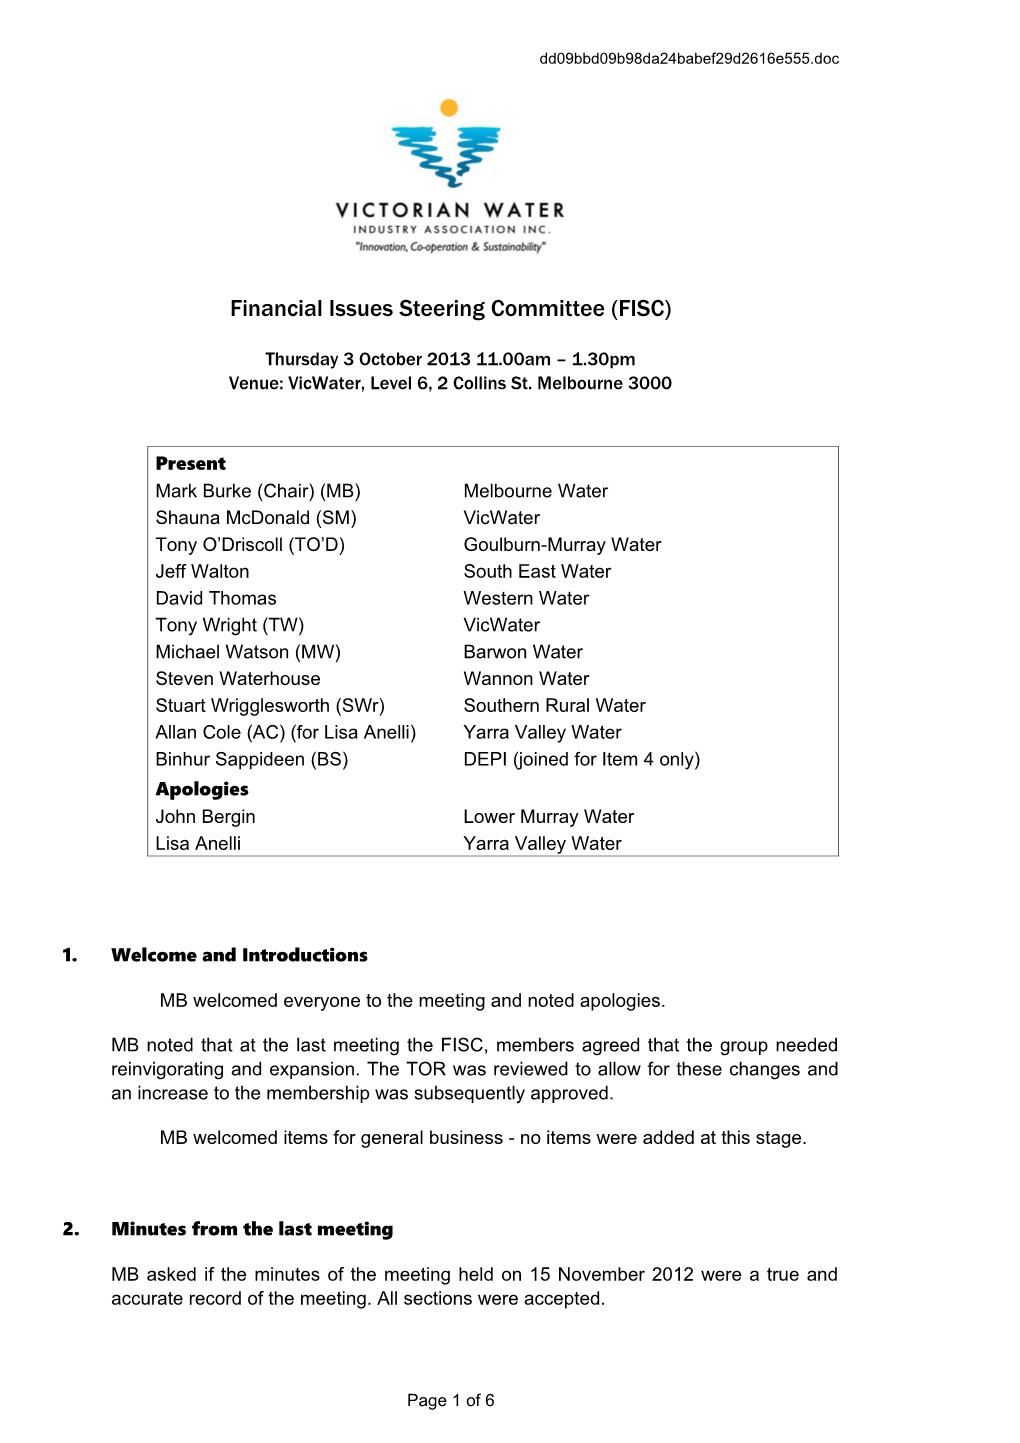 Financial Issues Steering Committee (FISC)